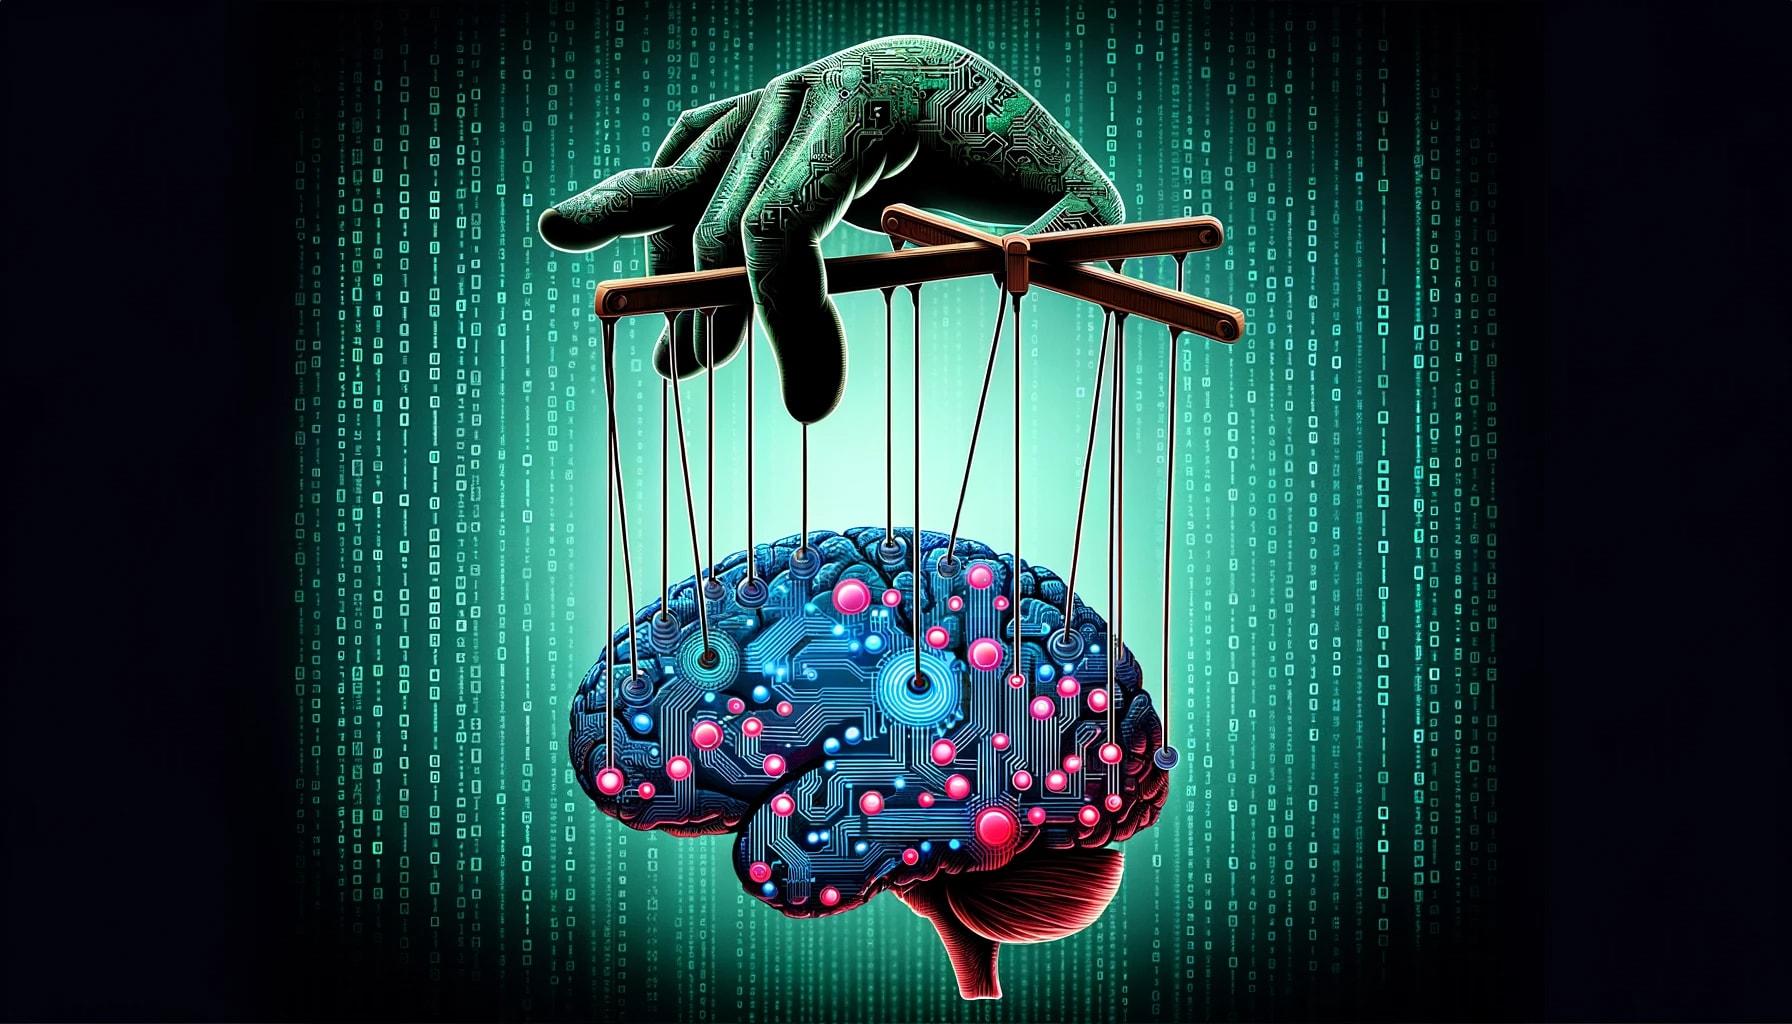 a stylized digital brain with circuit-like patterns and neural network imagery, manipulated by puppet strings held by a shadowy hand, against a background of binary code.